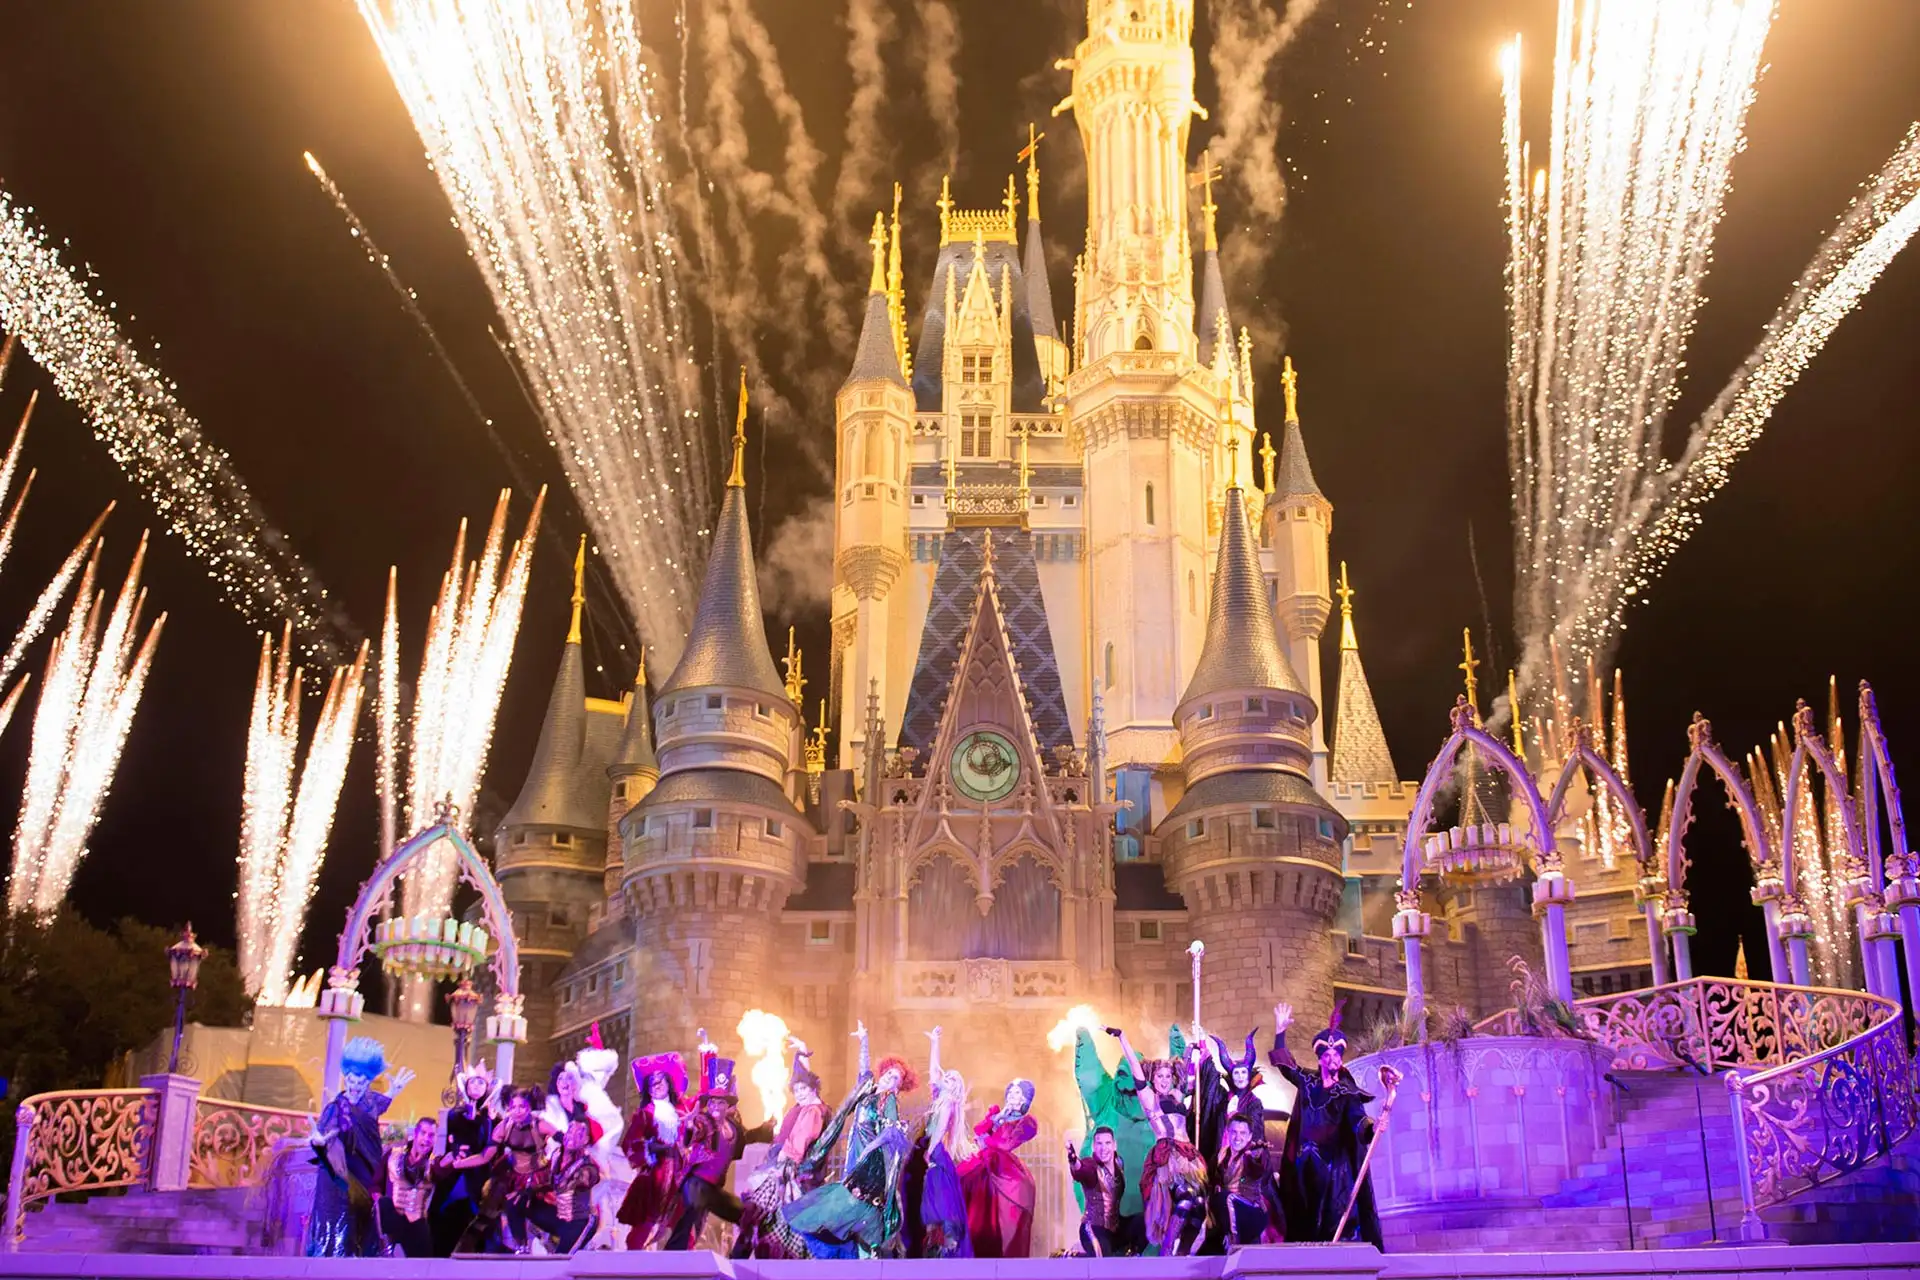 'Hocus Pocus Villain Spelltacular' Show during Mickey's Not-So-Scary Halloween Party at Disney